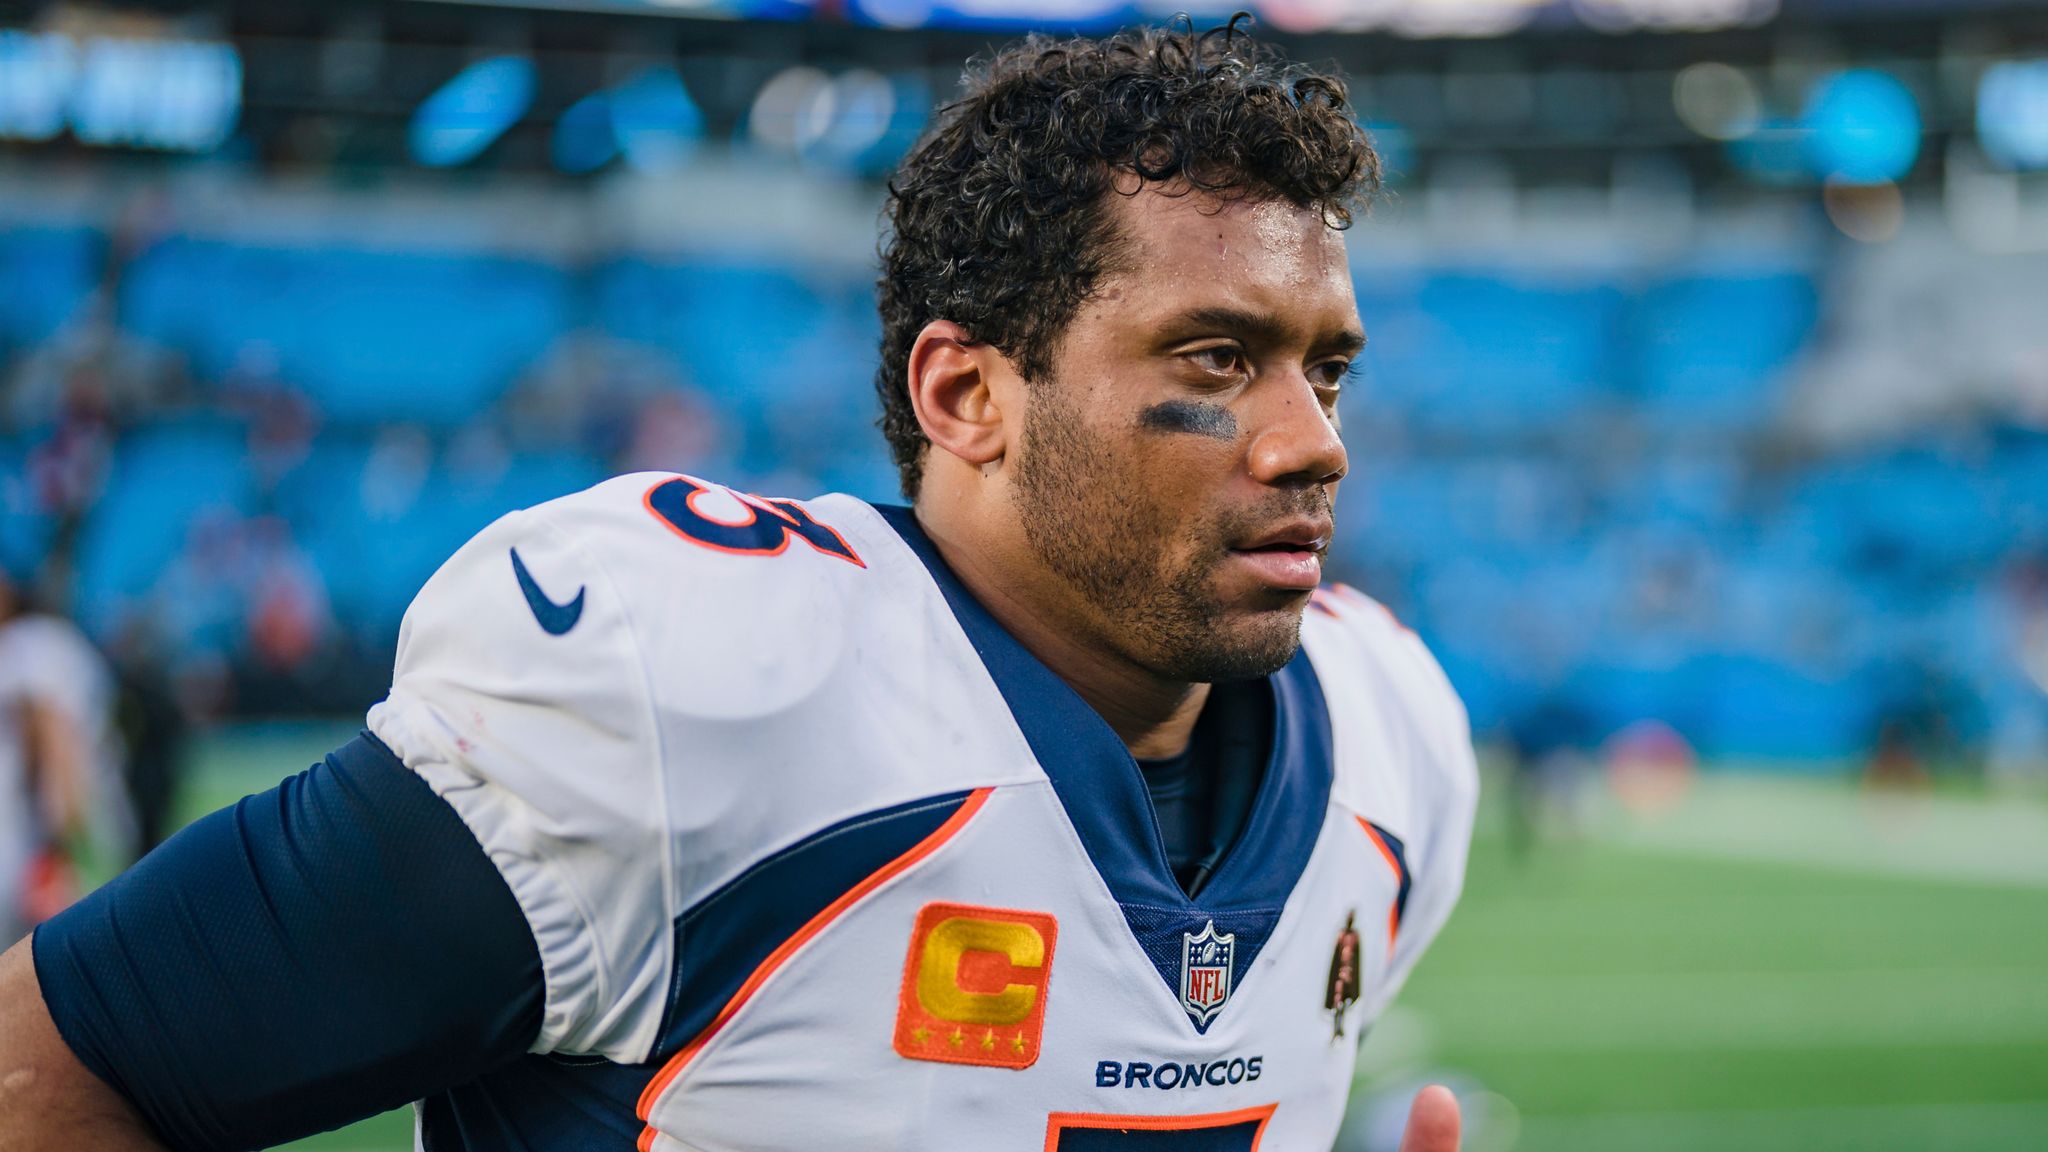  Russell Wilson's Turbulent Season: A Closer Look at His Struggles with the Broncos